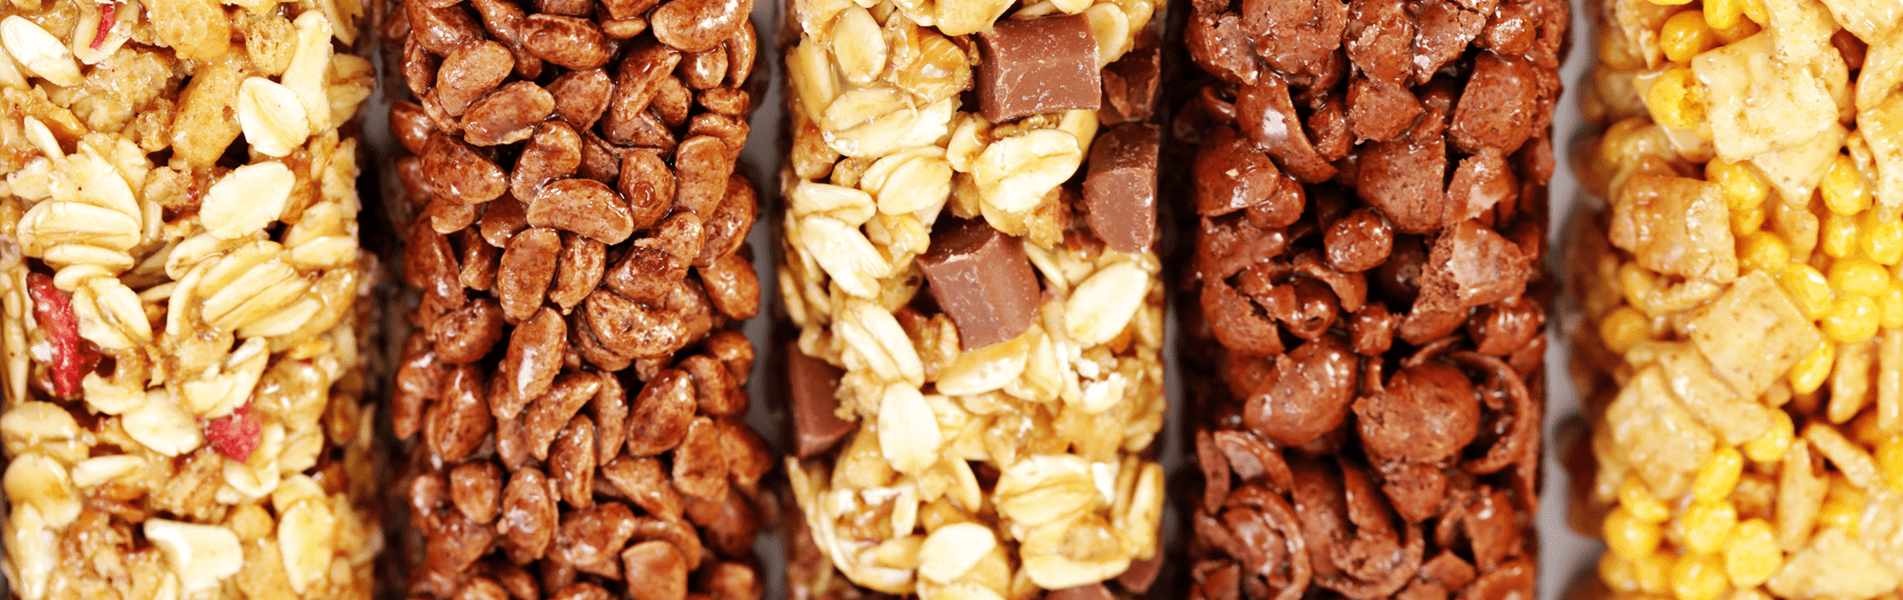 The Best Nutrition Bars: 5 Facts To Watch For On The Nutrition Label